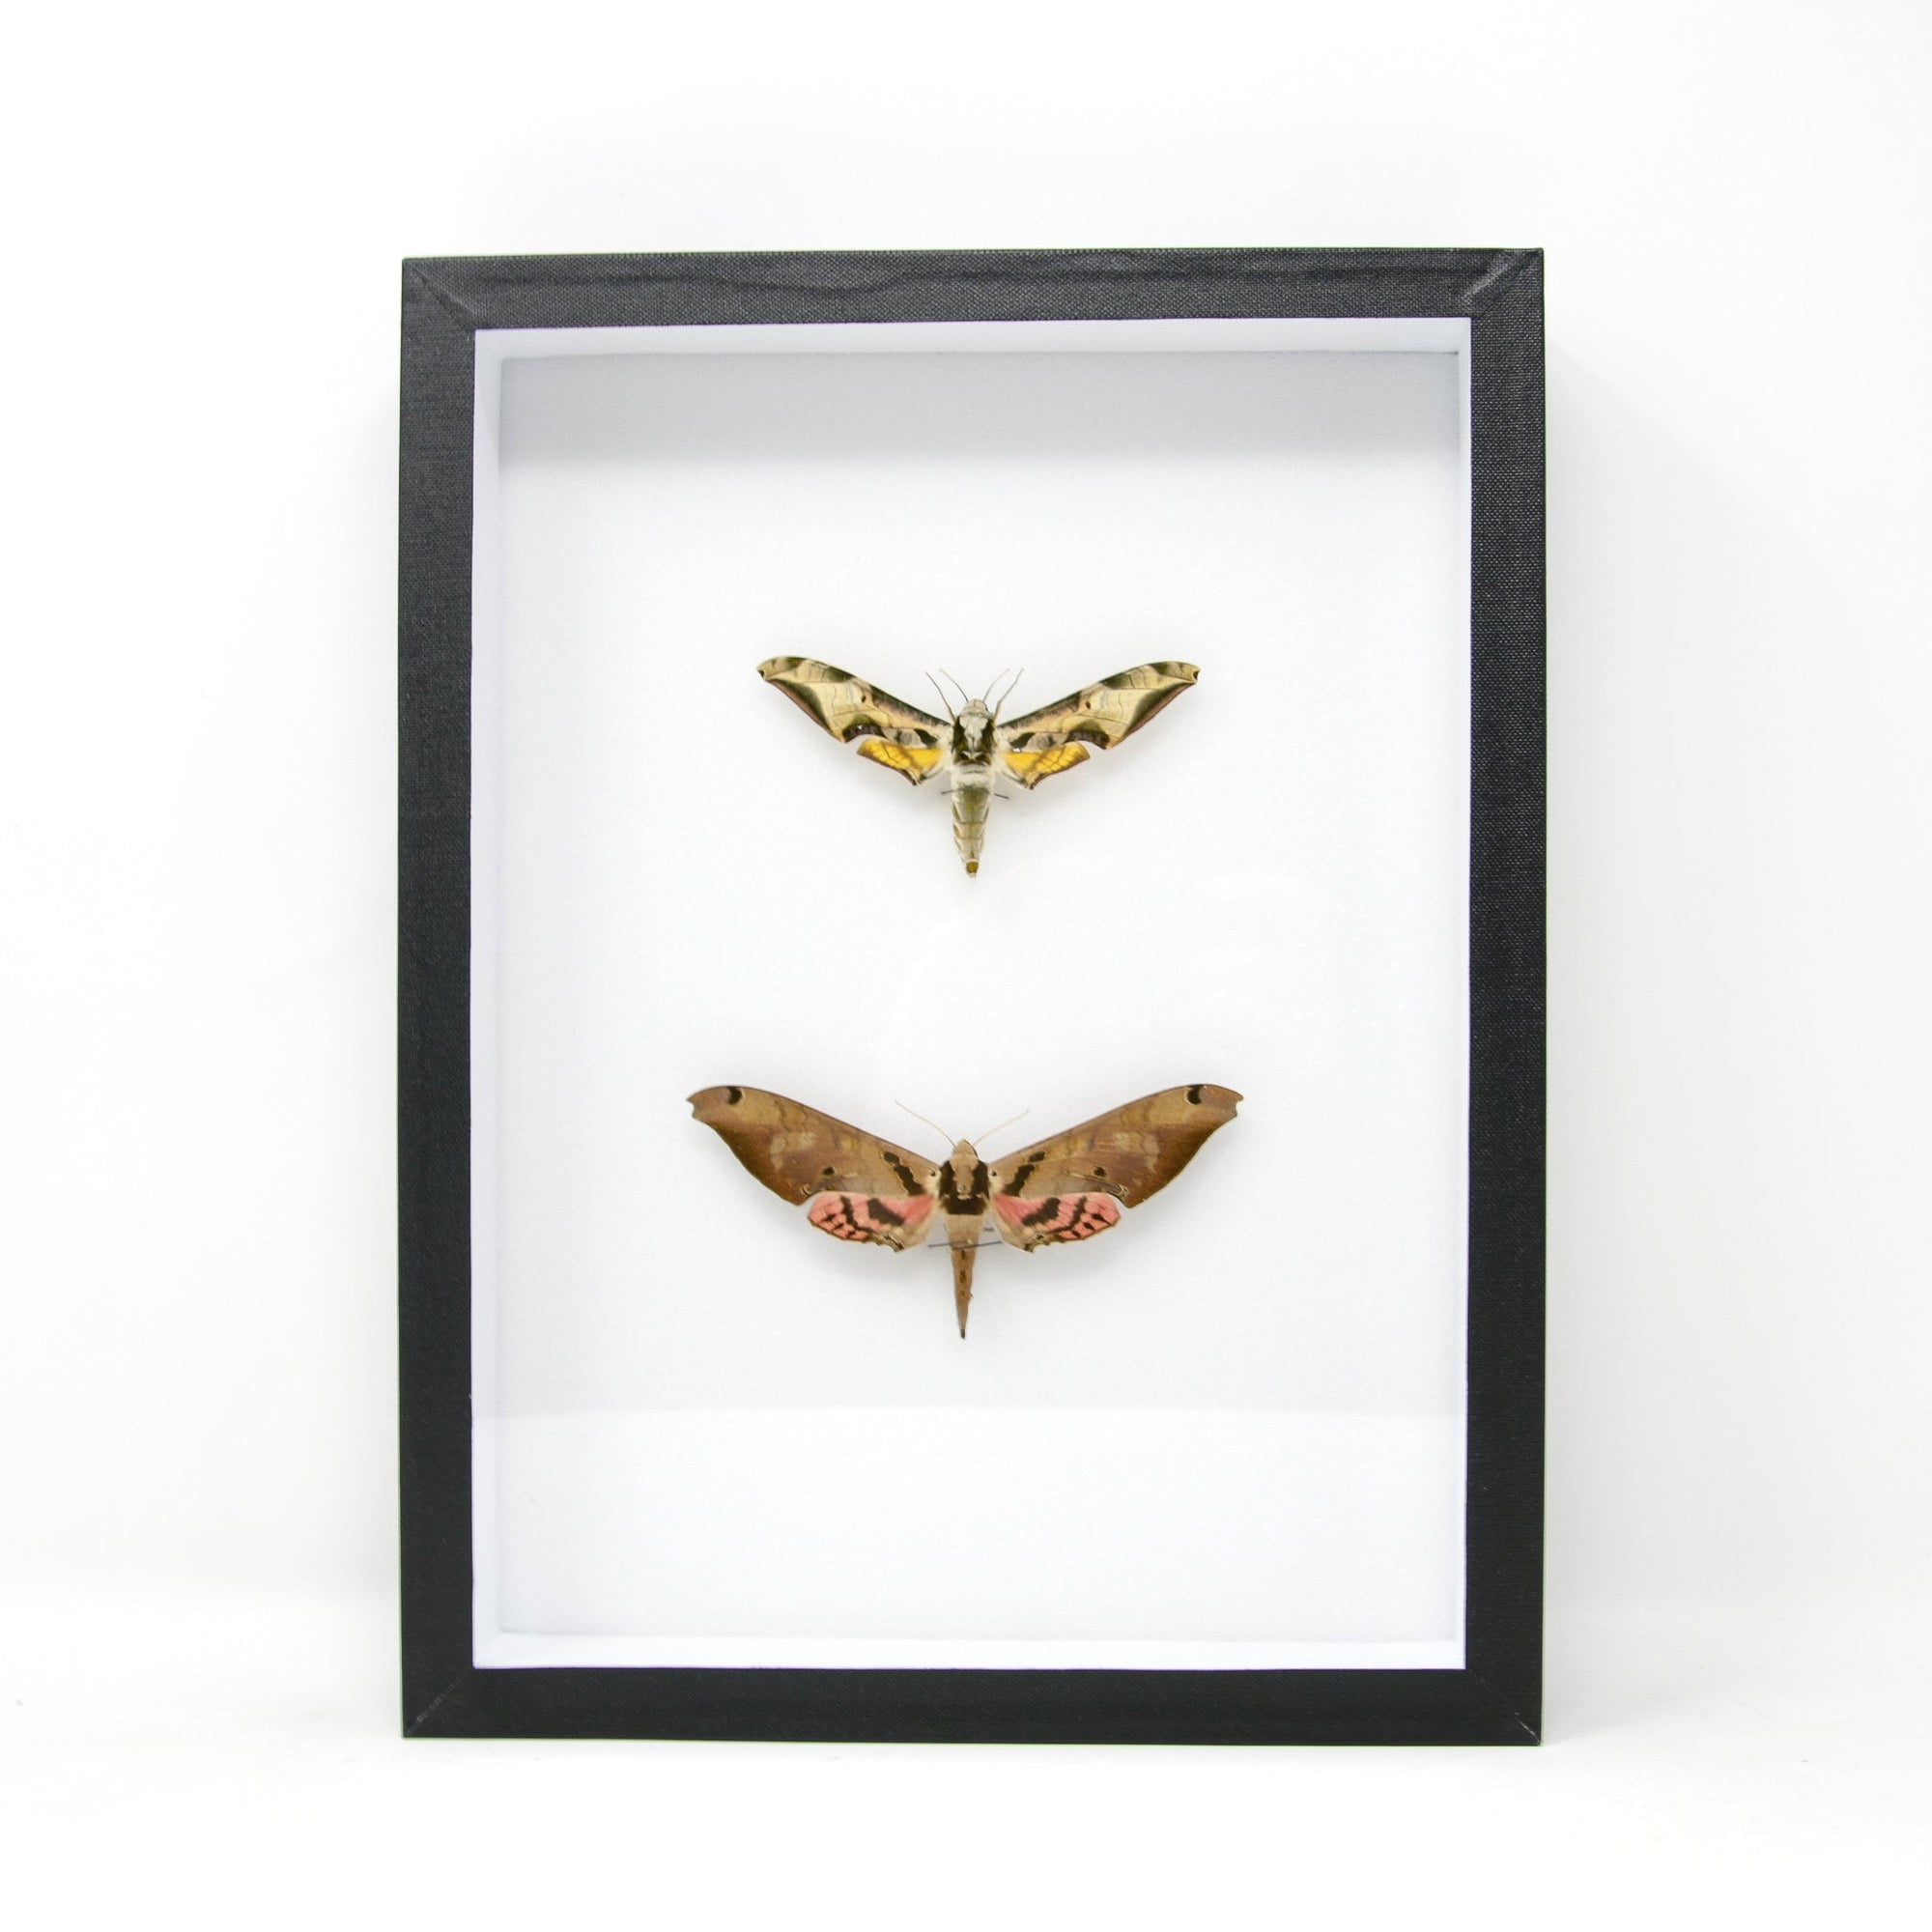 Hawkmoth Taxidermy Specimens | Pinned Lepidoptera with Scientific Collection Data, Entomology Box Frame | 12x9x2 inch  BFS12